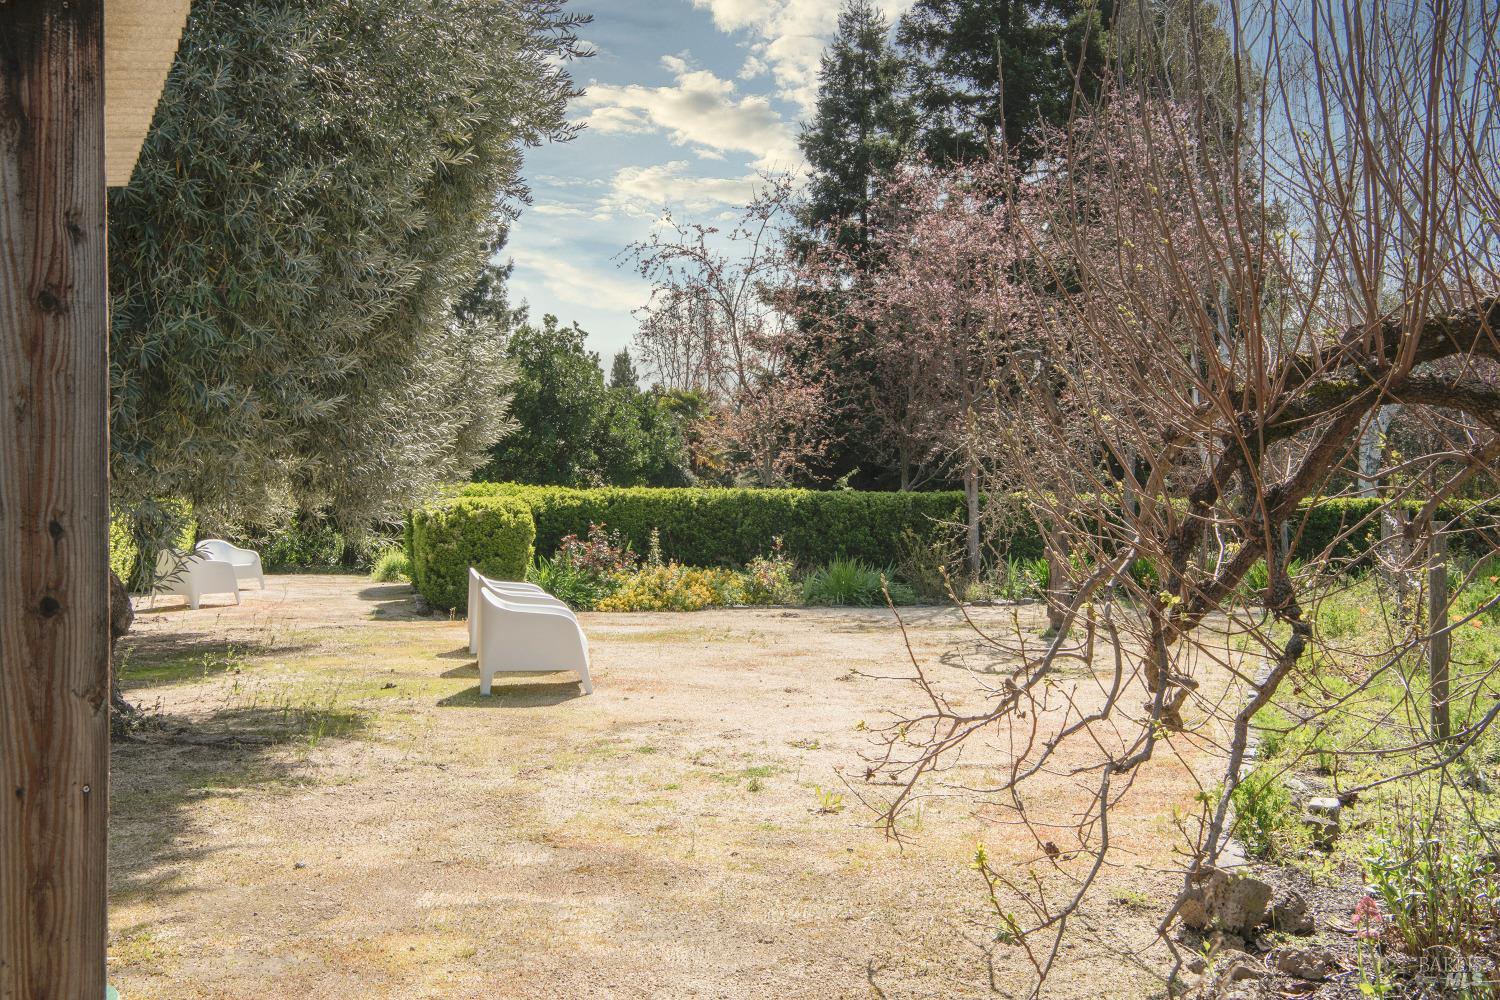 This beautiful vacant lot nestled in downtown Sonoma offers a rare opportunity for those seeking a slice of tranquility in the heart of the city. Despite its central location, the lot is tucked away at the end of a quiet cul-de-sac offering a peaceful treat.  Spread across a spacious .3 acre, this lot boasts an array of mature trees, colorful flowers, and fruit trees, creating a picturesque oasis within the urban landscape. With public utilities available, as well as a private well, this blank canvas presents endless possibilities for those with a vision.  Whether you dream of building your custom home, or envision a lush garden sanctuary, this lot provides an idea foundation.  For those seeking an all-encompassing solution, the option to purchase the adjacent custom home provides the opportunity to seamlessly blend urban convenience with refined living.